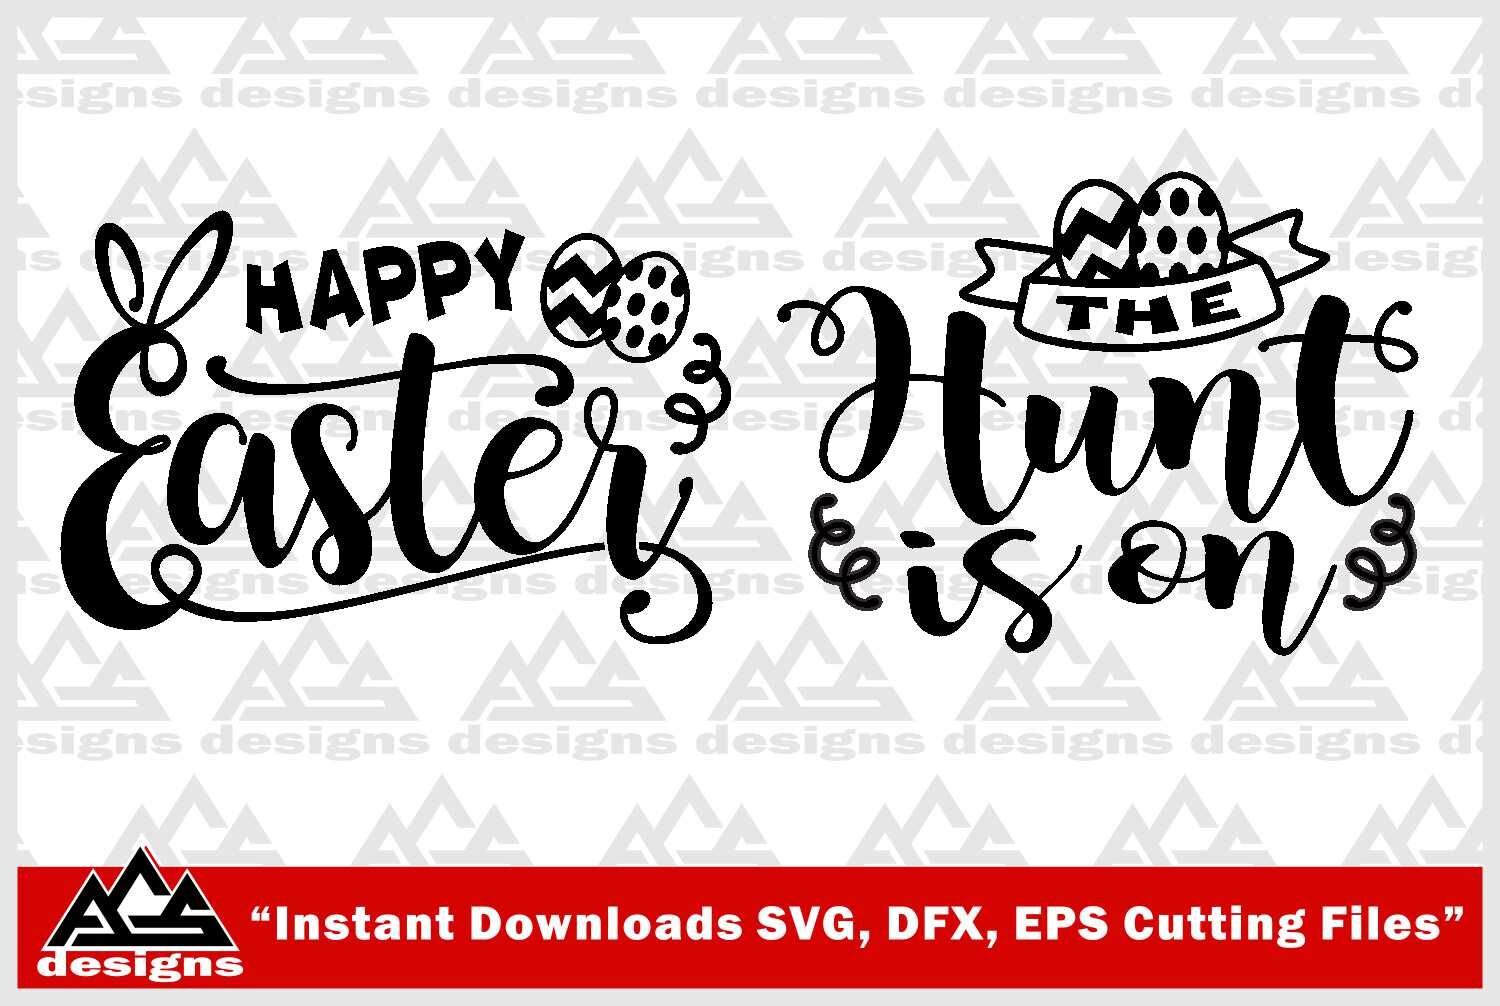 Download Happy Easter Svg Design By Agsdesign Thehungryjpeg Com